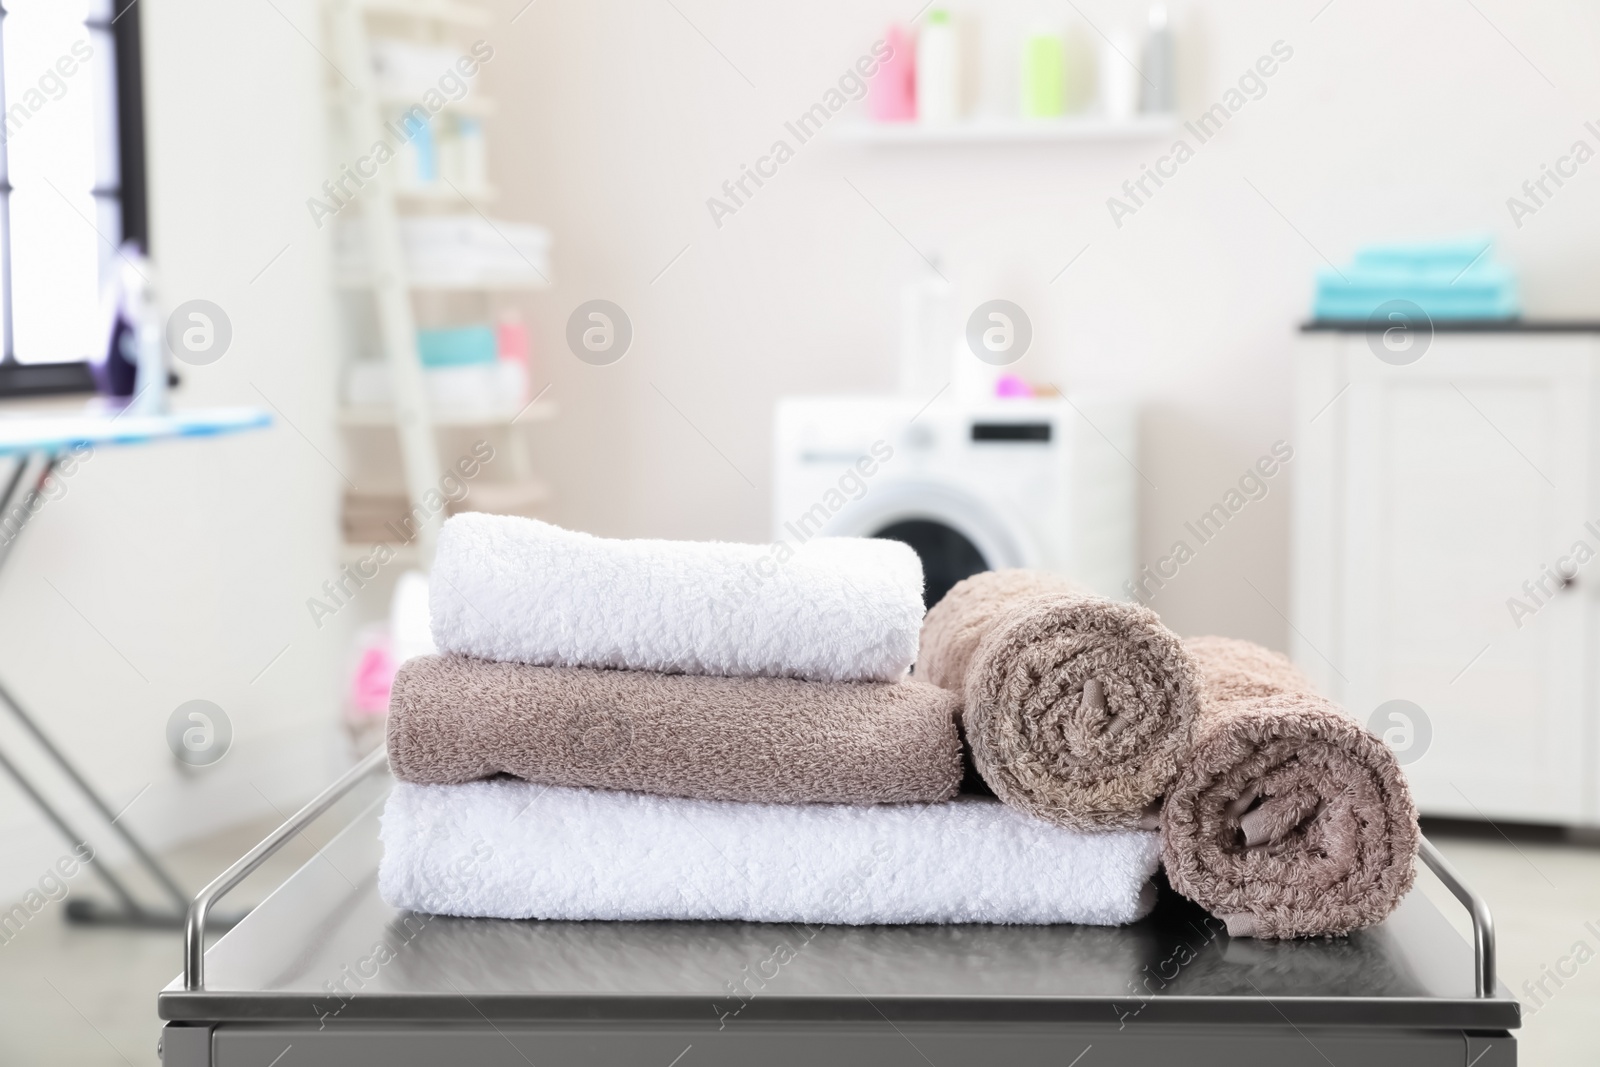 Photo of Soft bath towels on table against blurred background